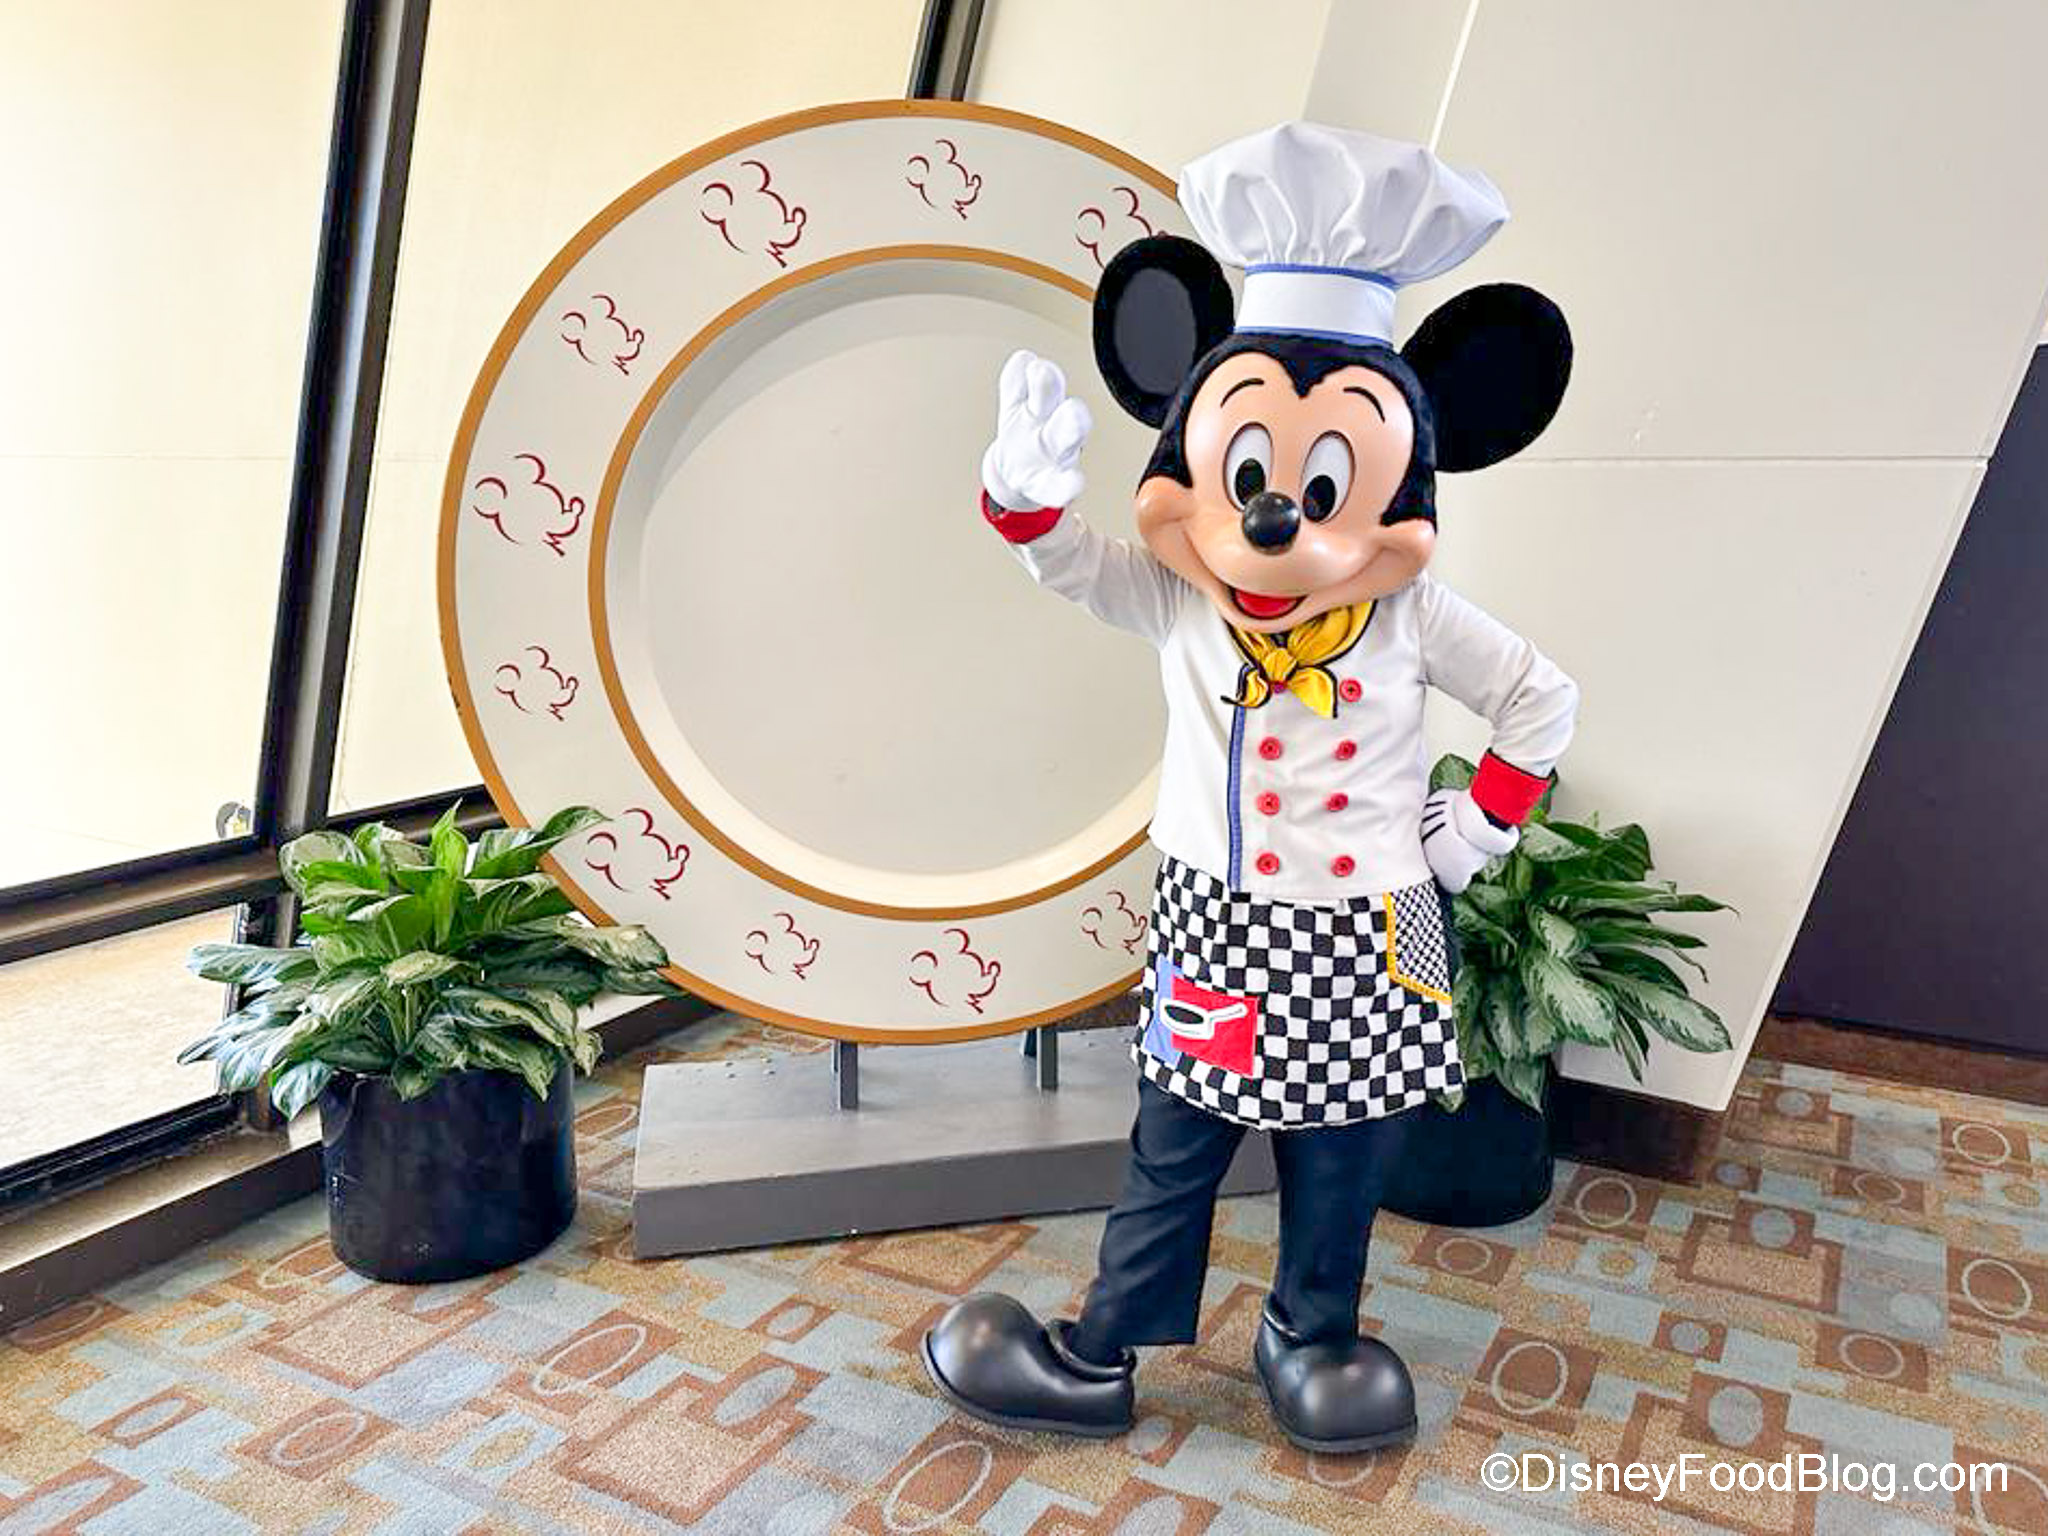 https://www.disneyfoodblog.com/wp-content/uploads/2023/03/2023-wdw-contemporary-resort-chef-mickeys-characters-mickey.jpg